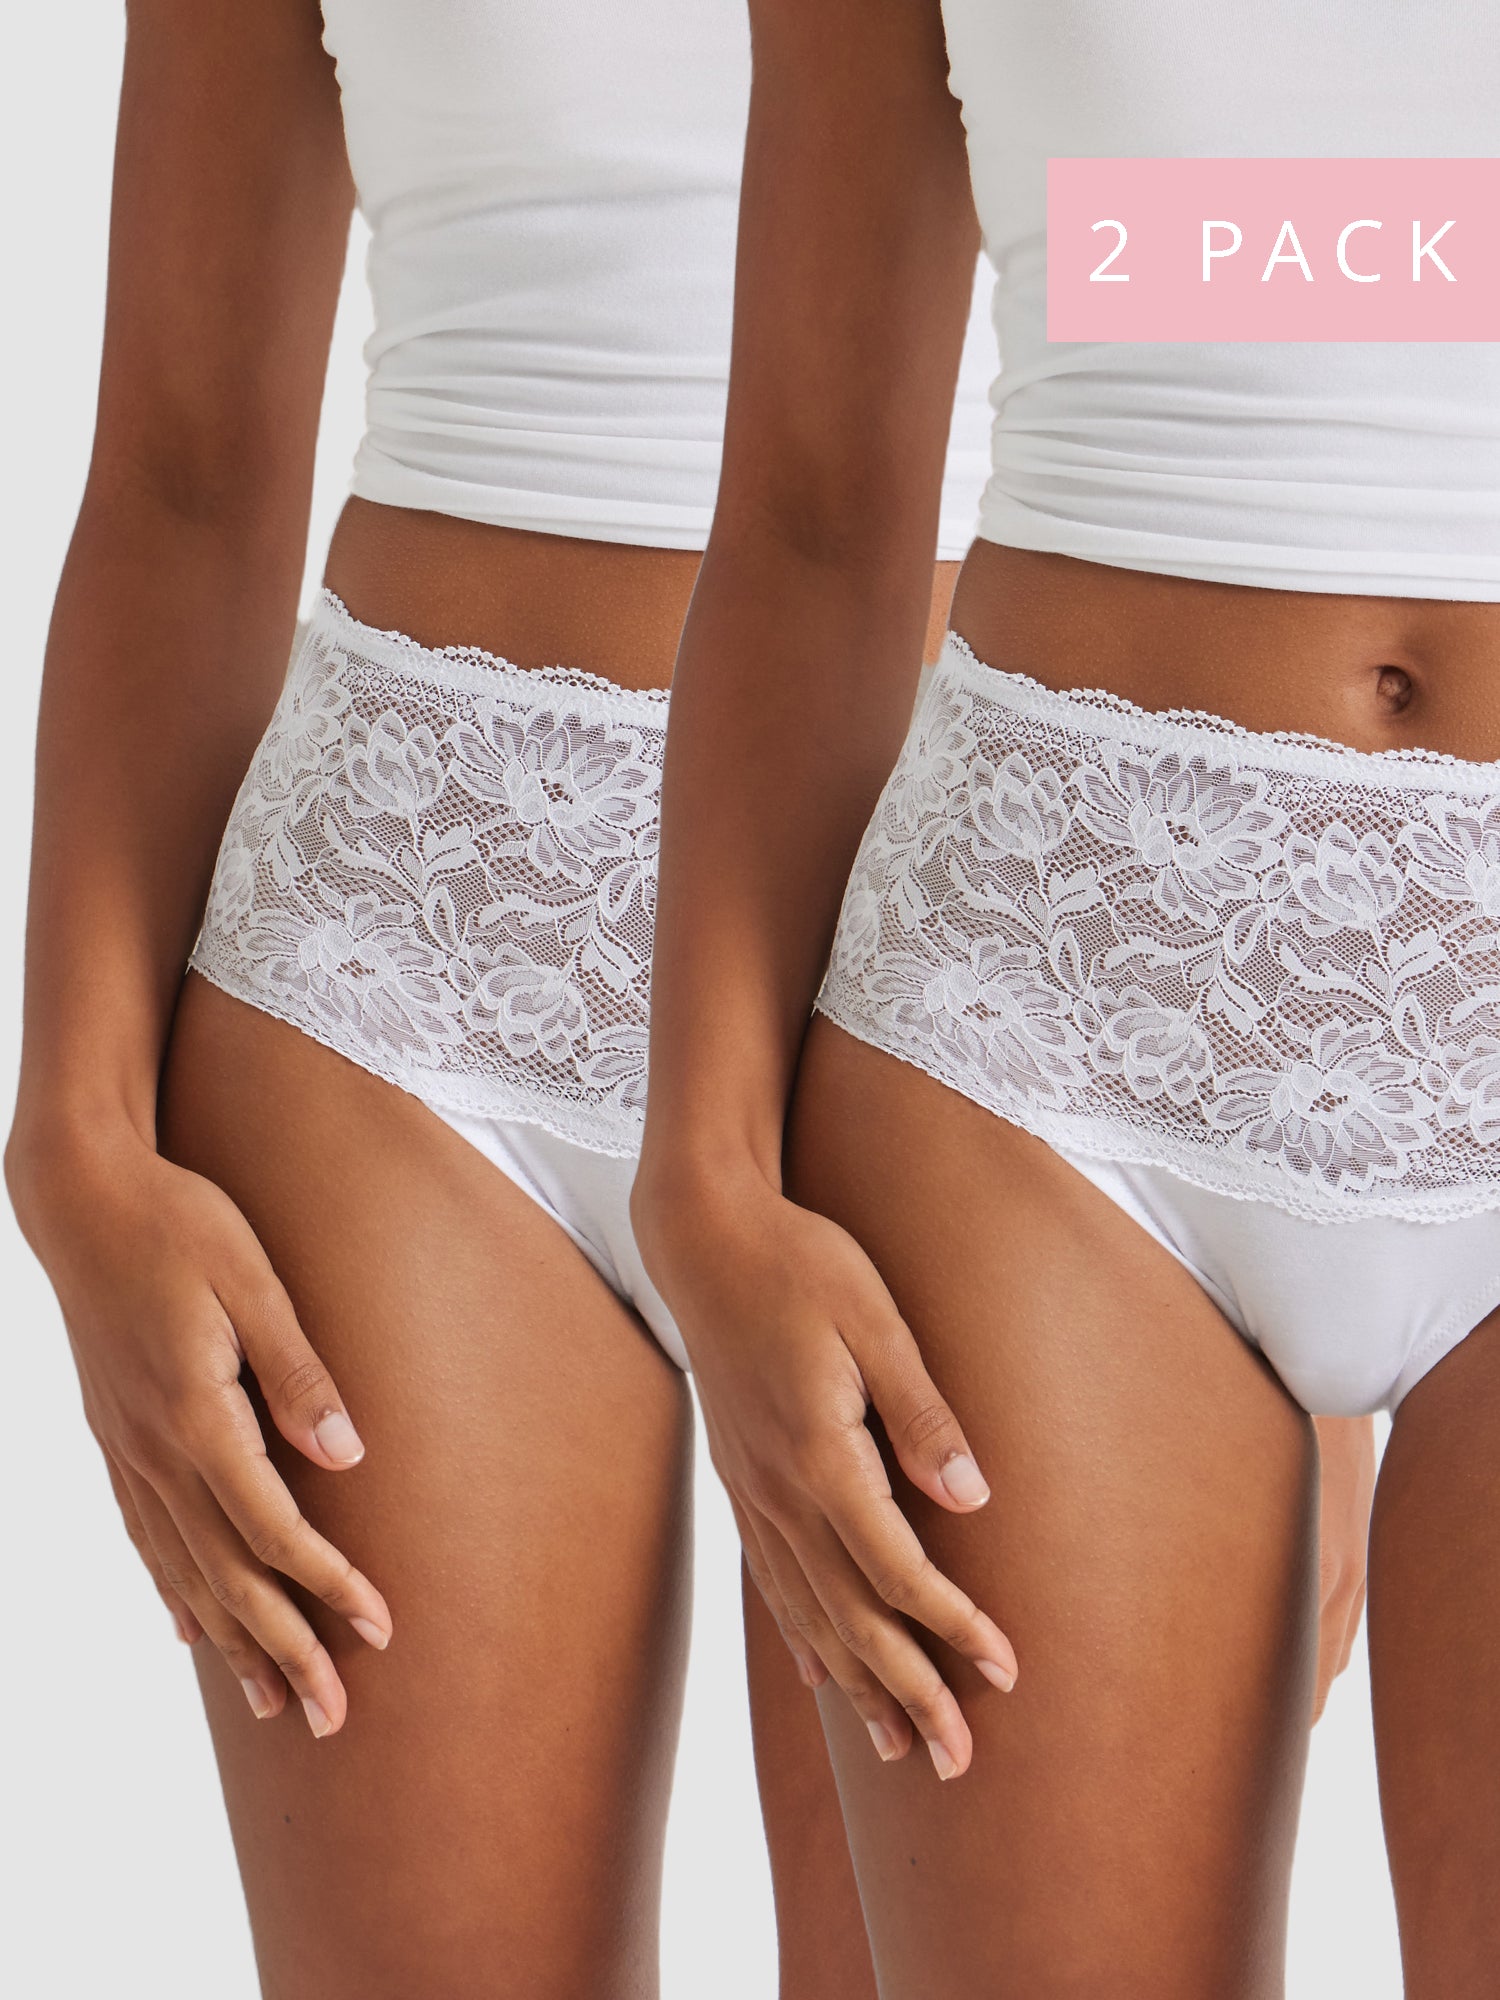 2-Pack Daily Essentials Cotton & Floral Lace Full Brief - White - Kayser Lingerie